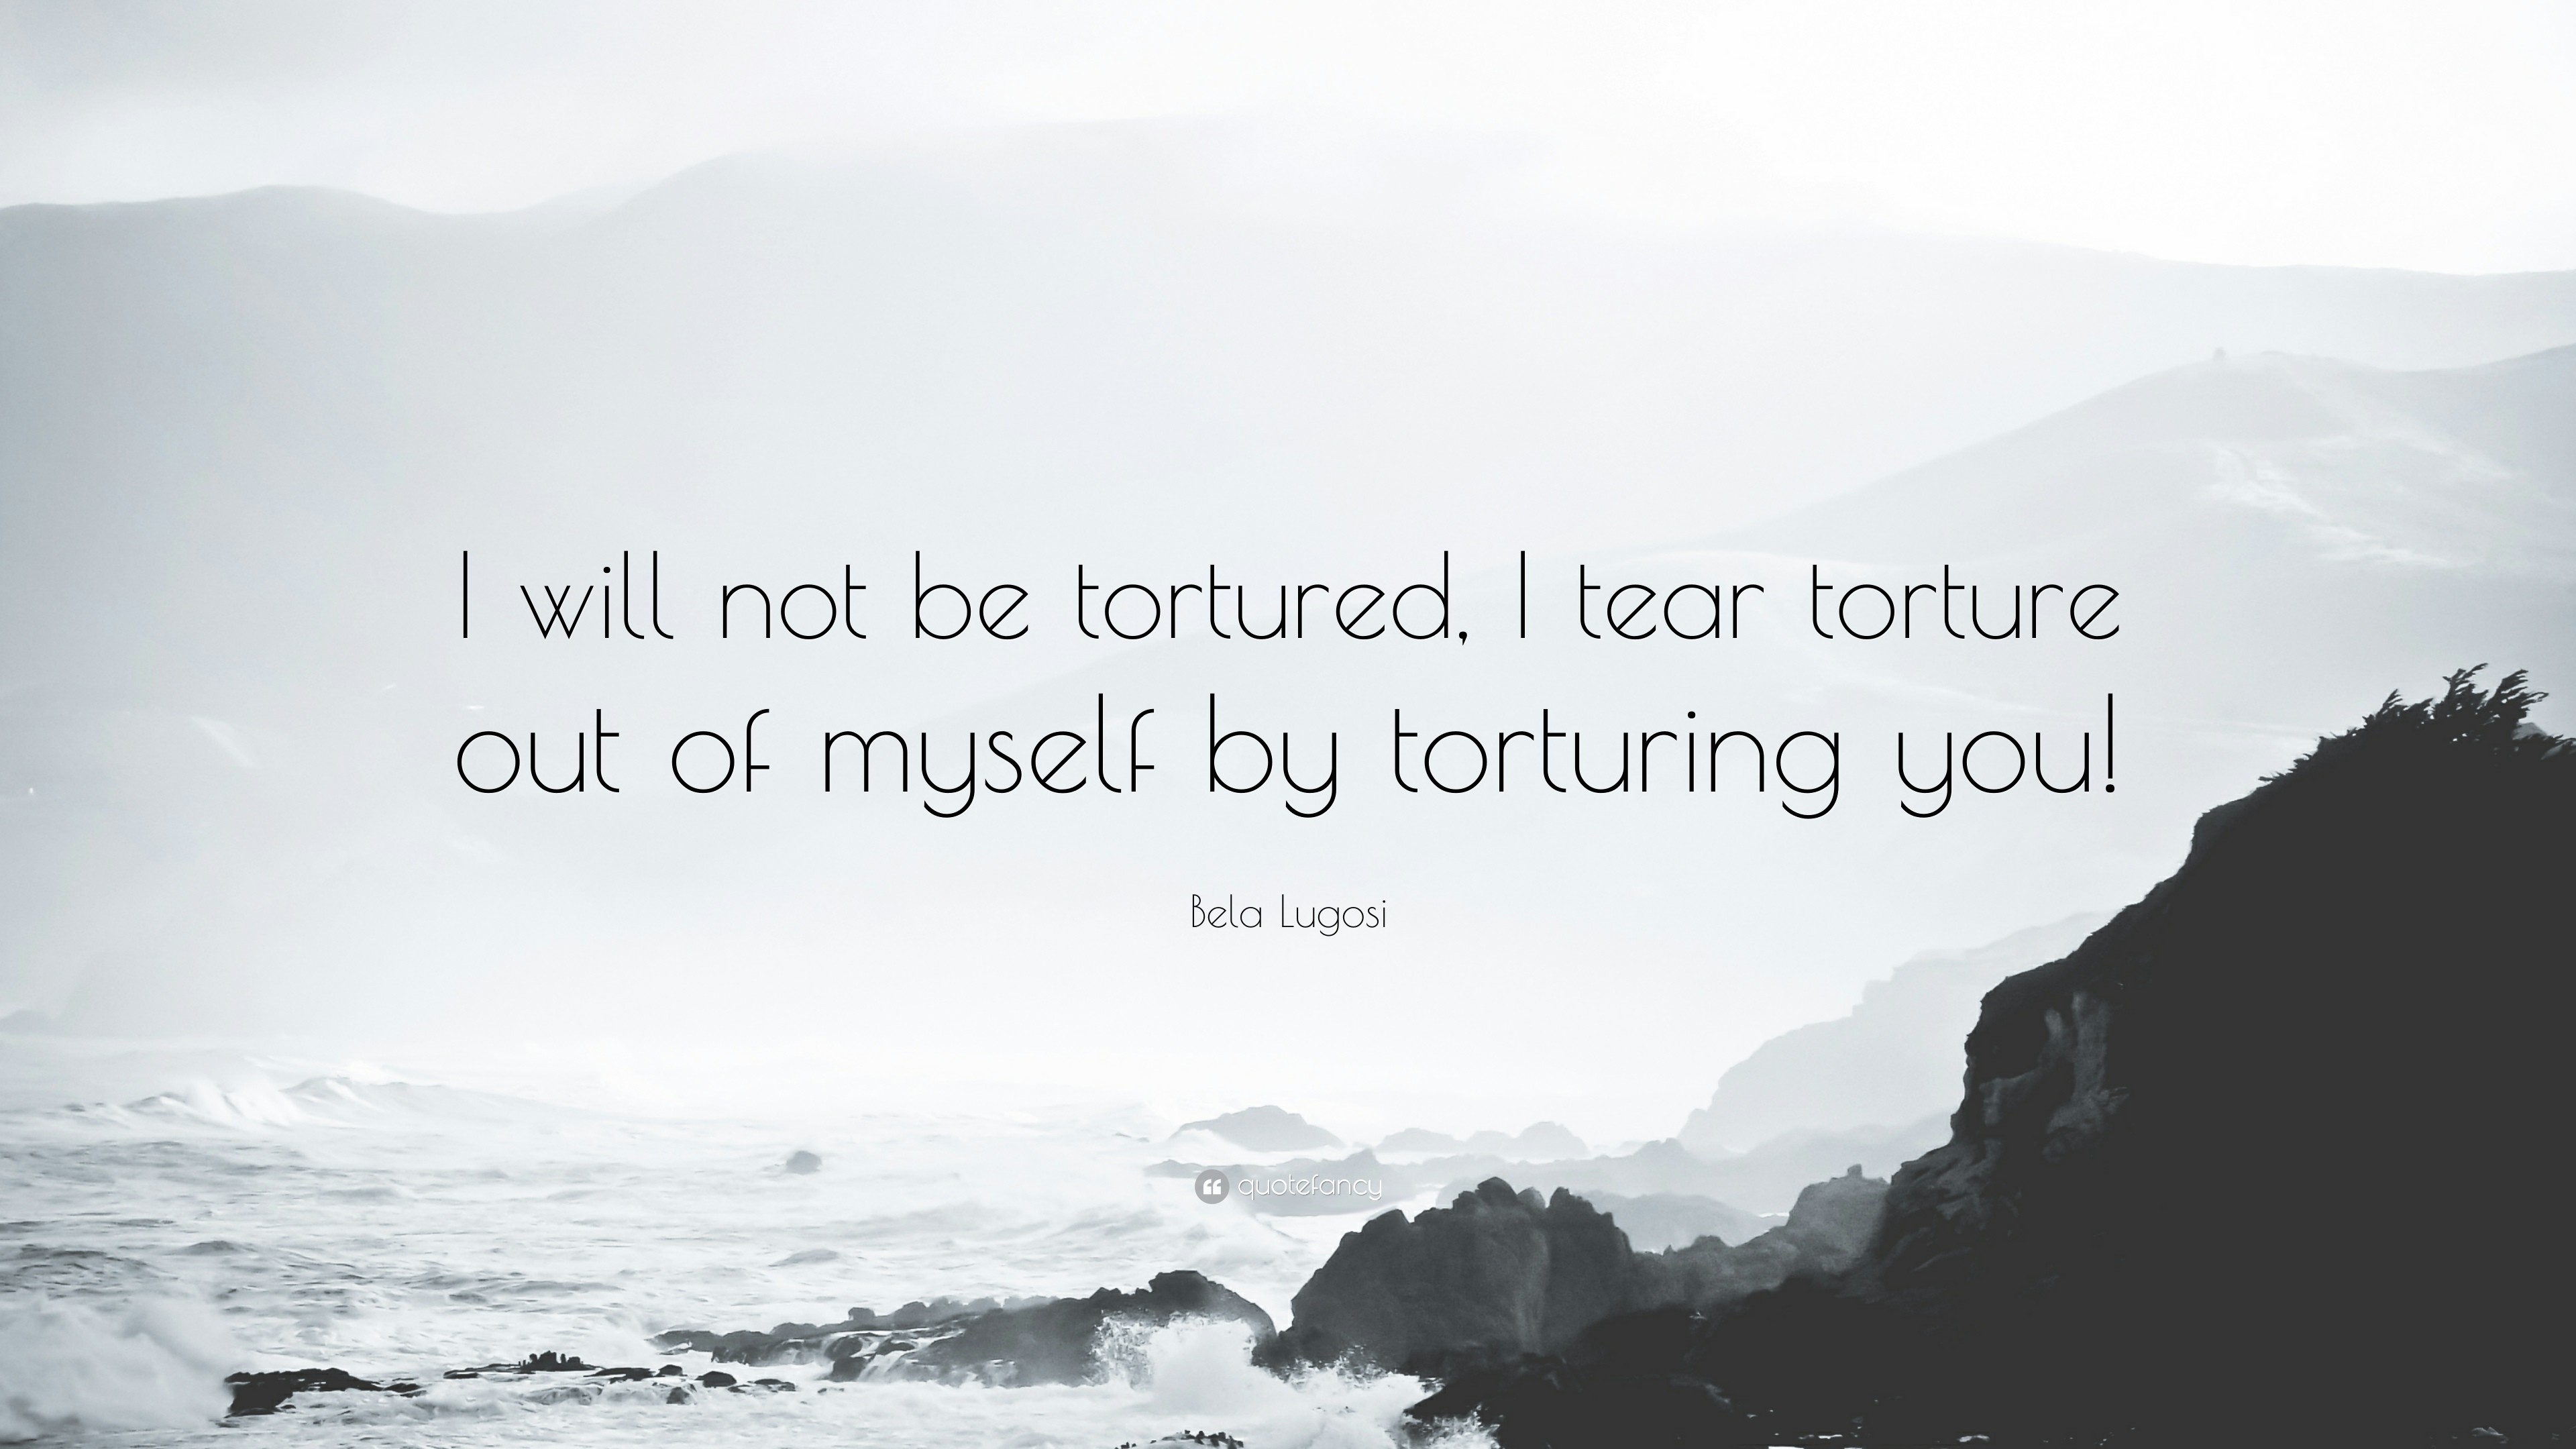 3840x2160 Bela Lugosi Quote: “I will not be tortured, I tear torture out of